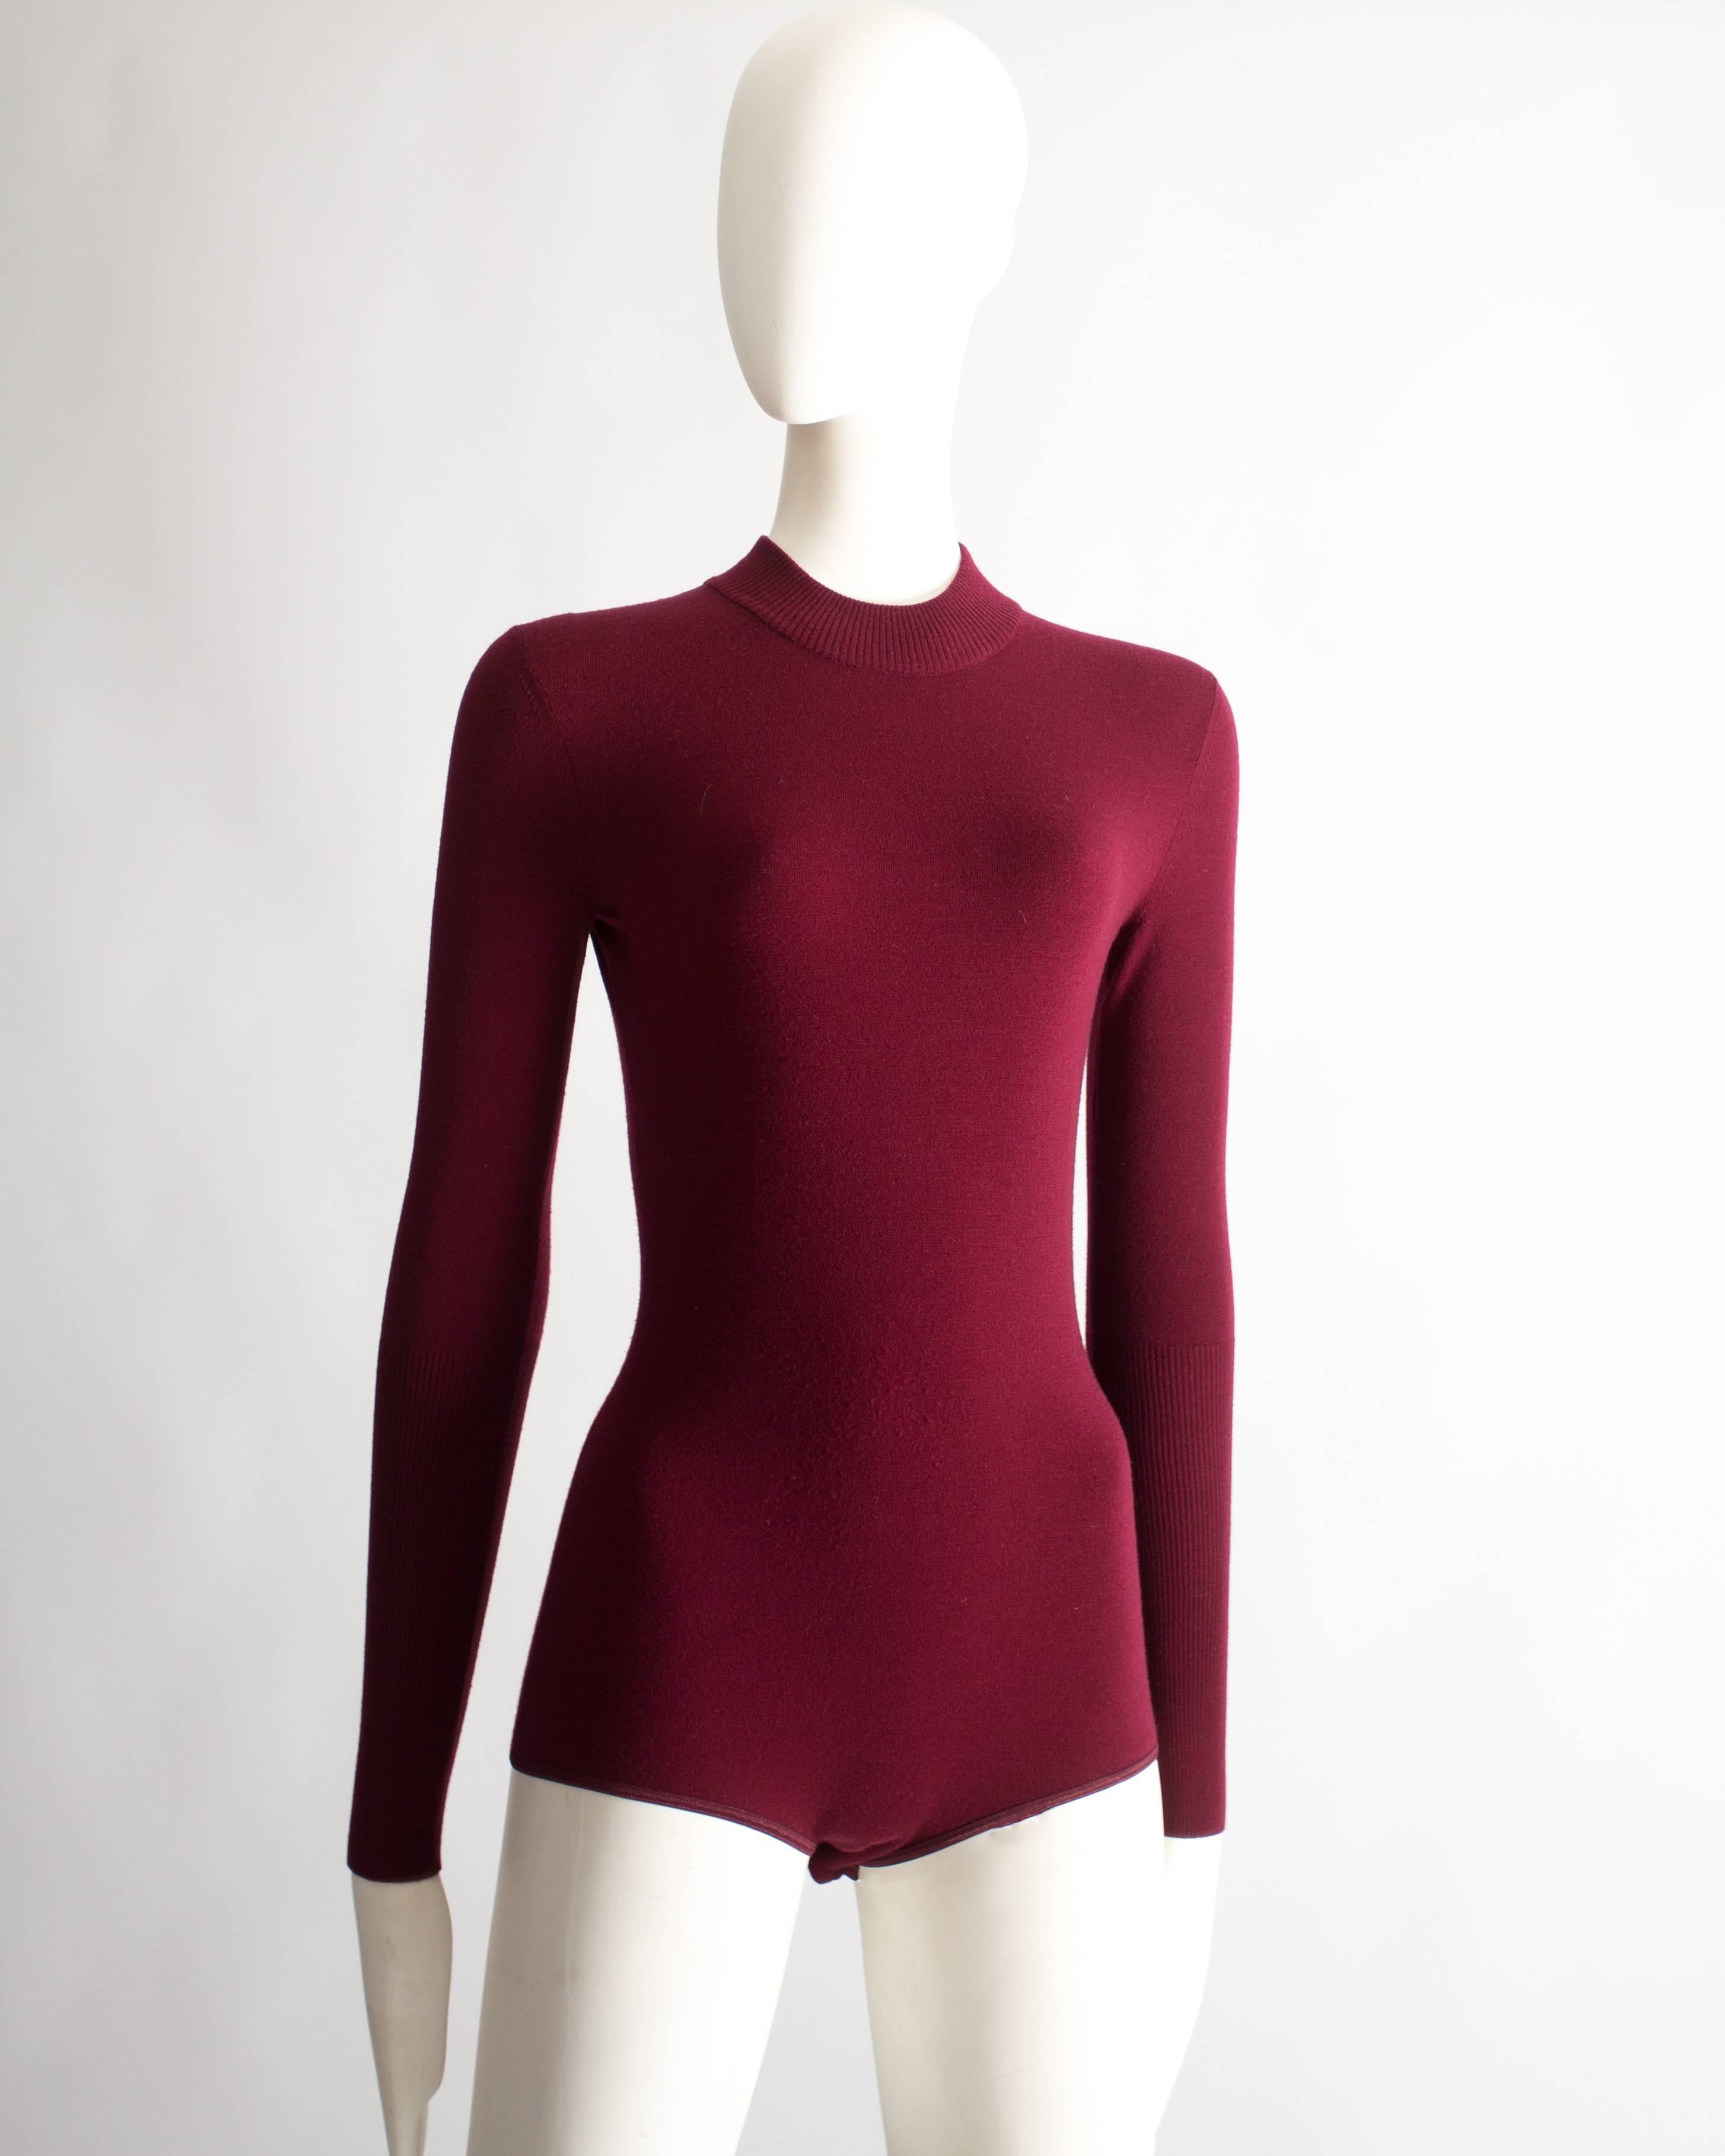 Women's Alaia maroon chenille and wool body and skirt ensemble